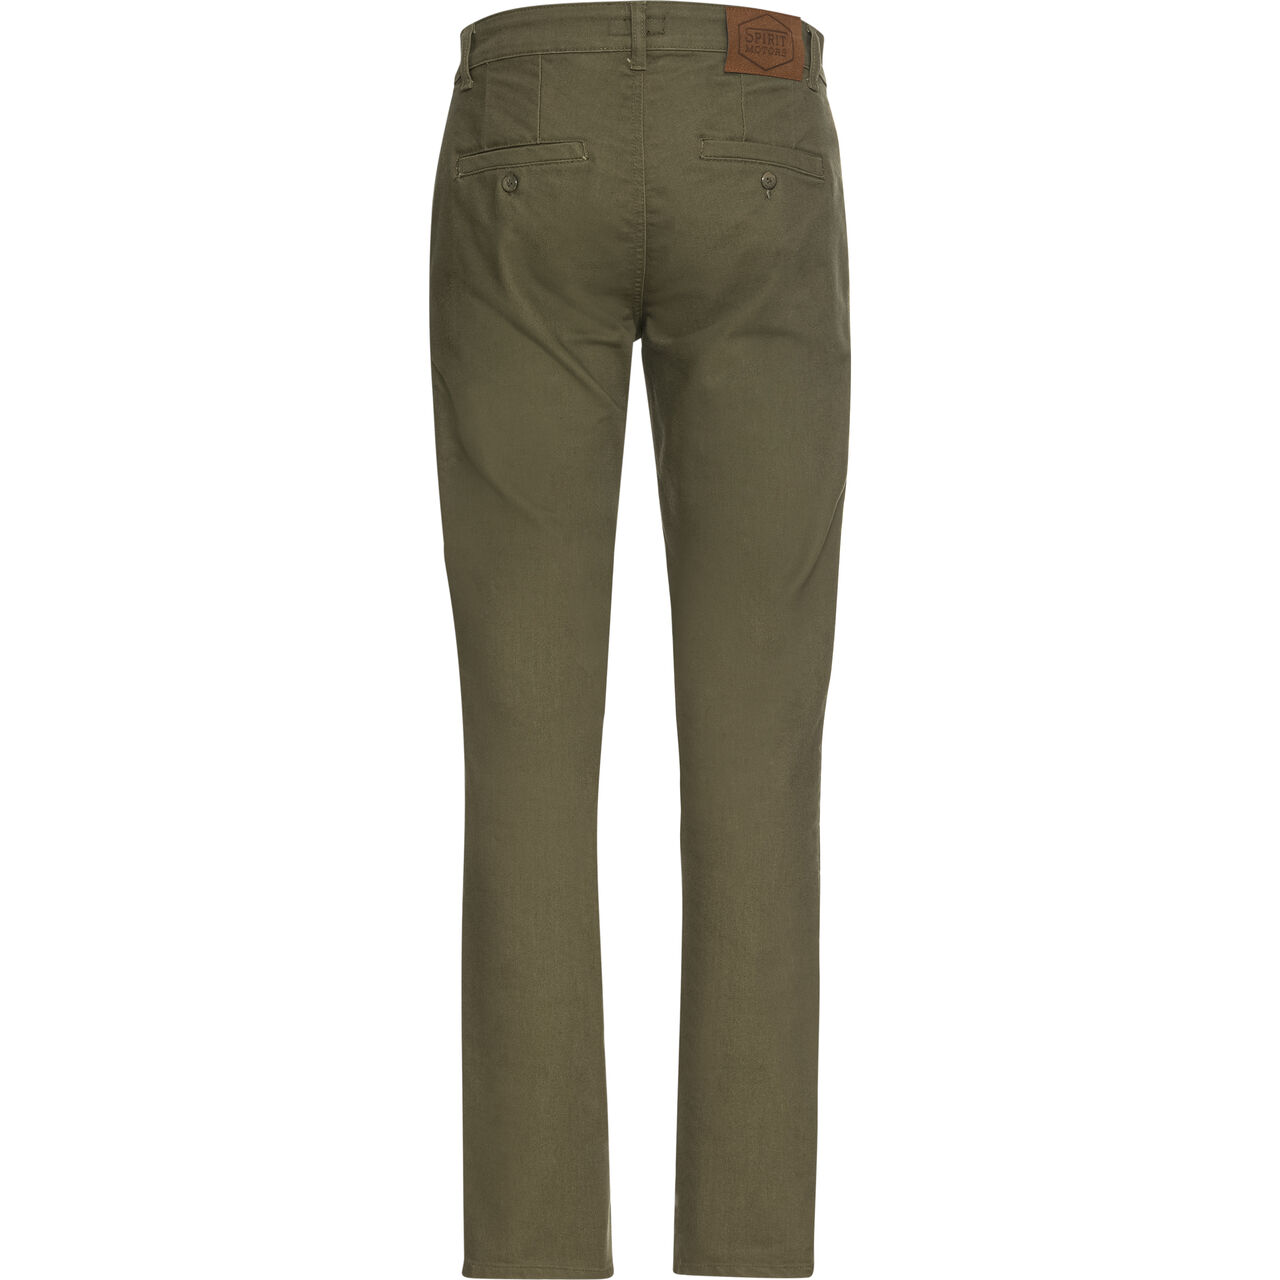 Eager Elliot Chino Pants green 38/34